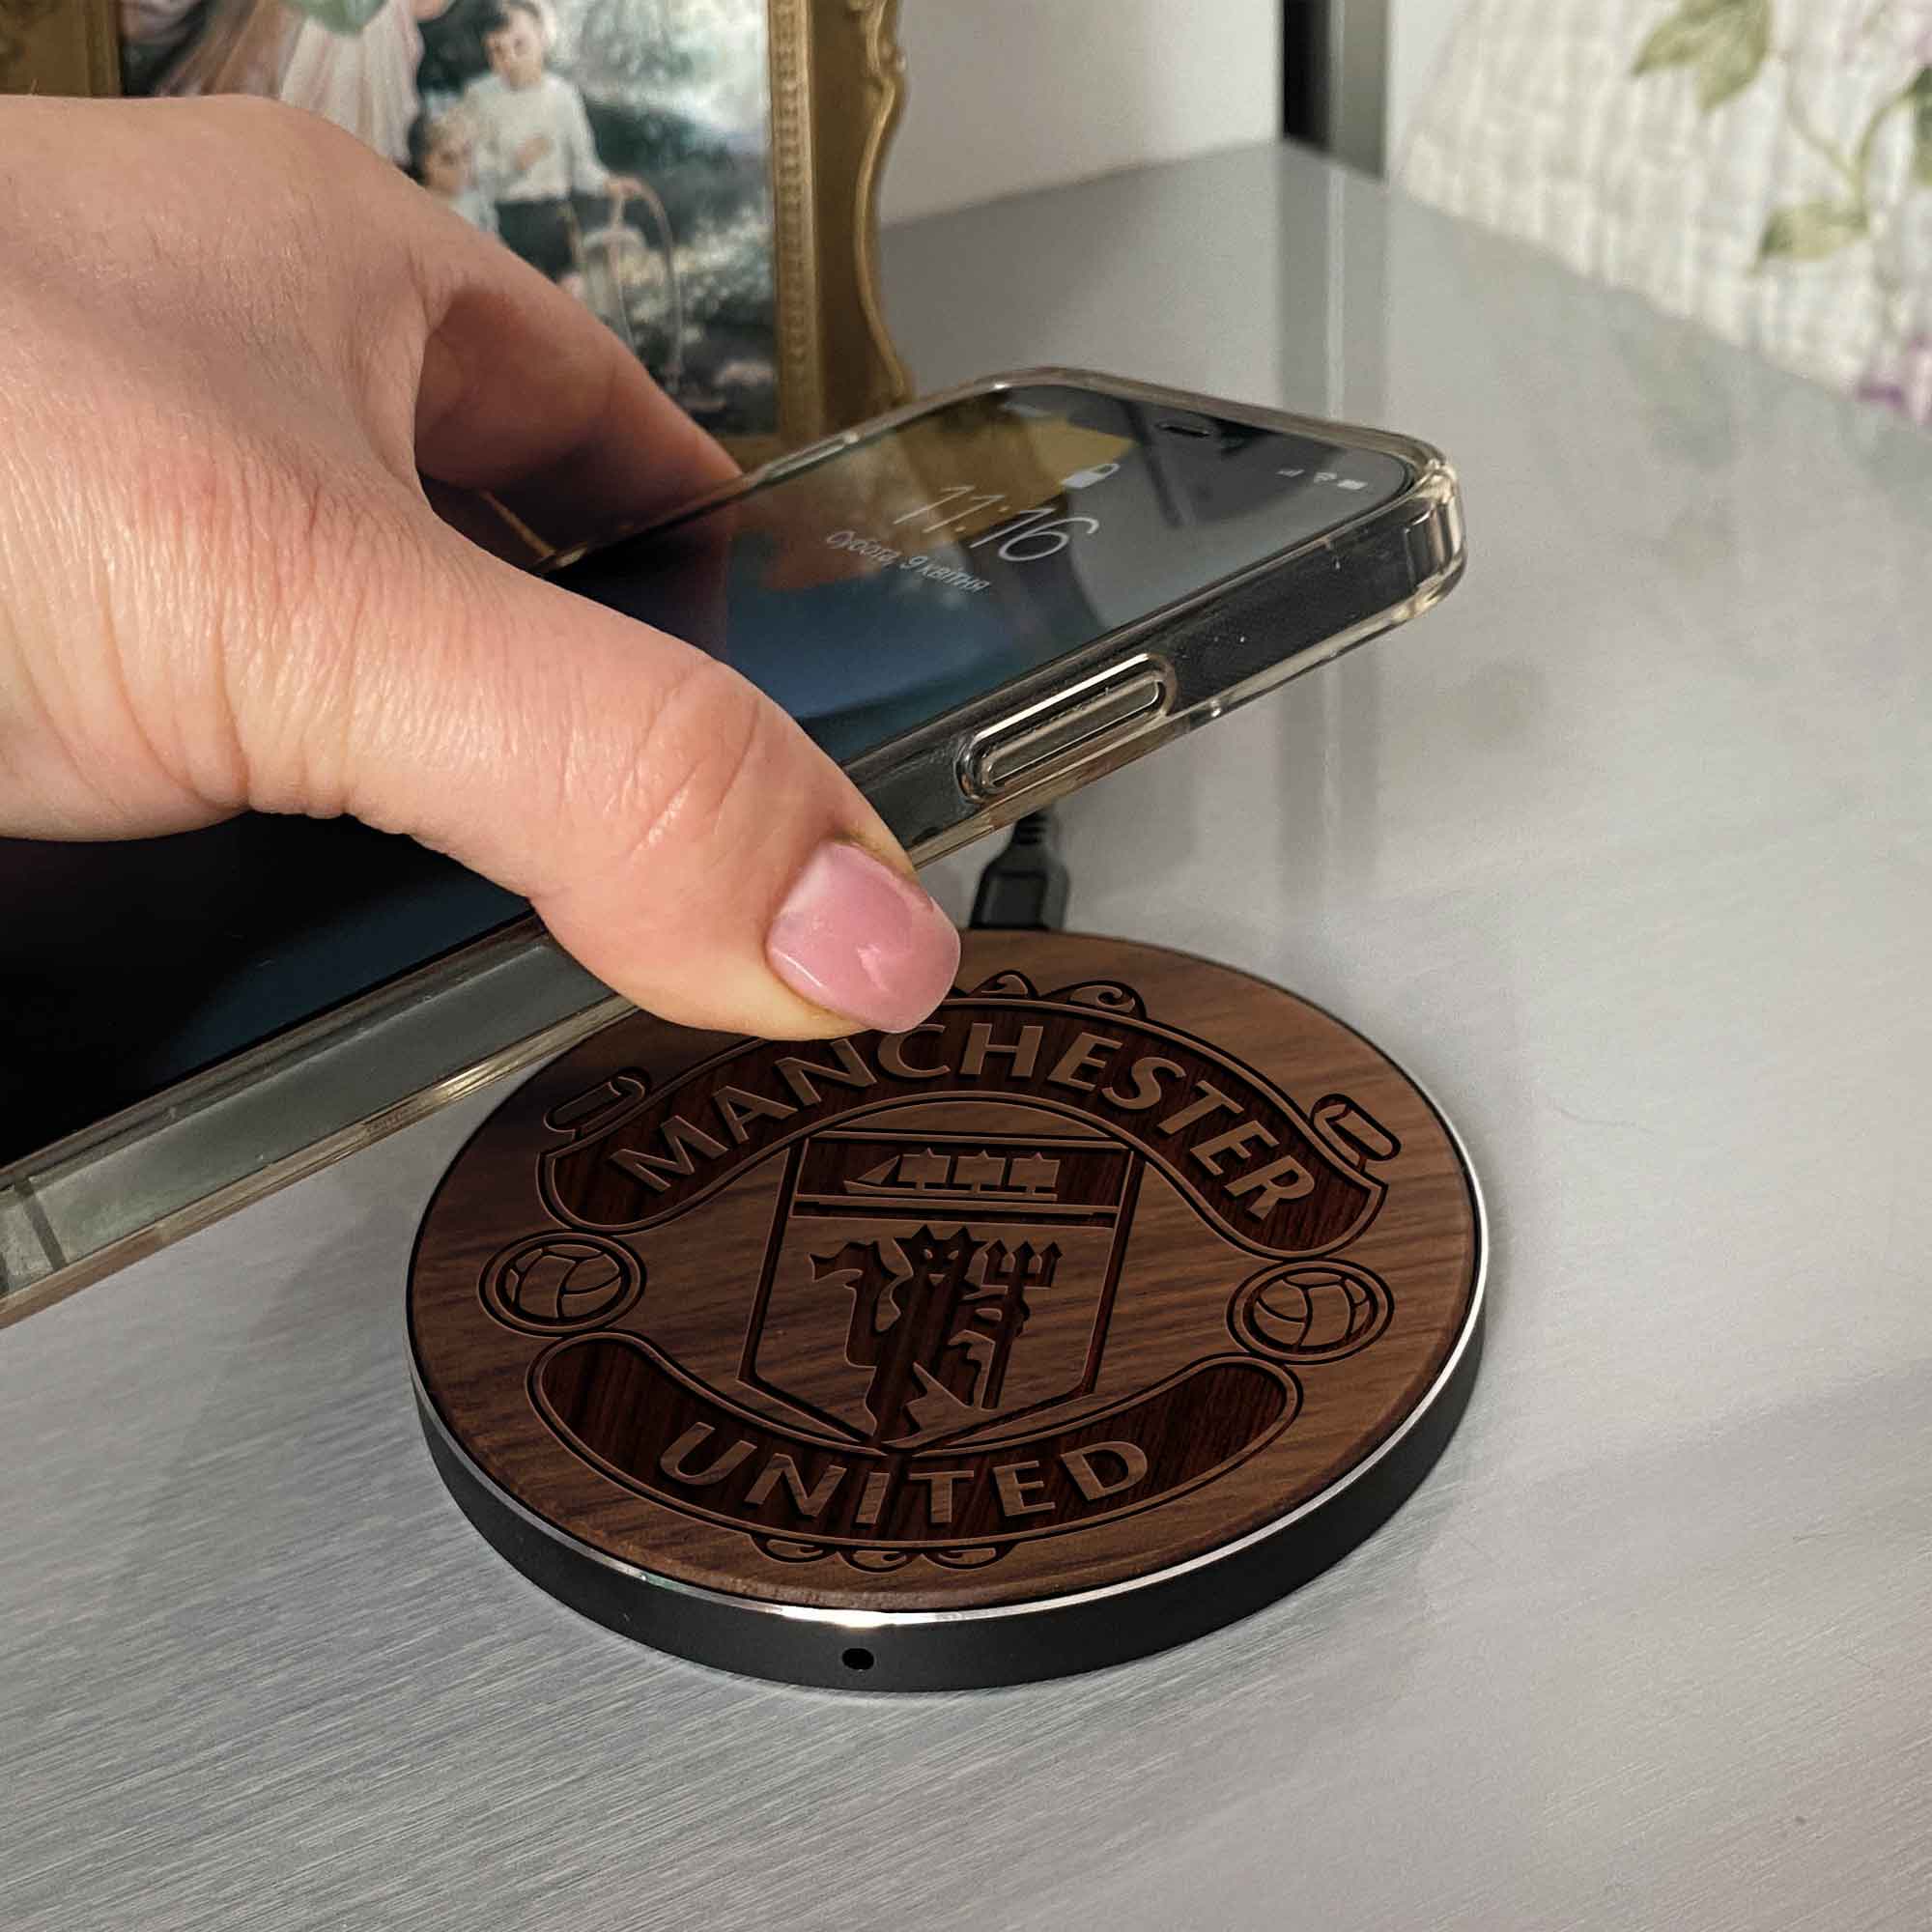 Wireless Fast Charger engraving Manchester football